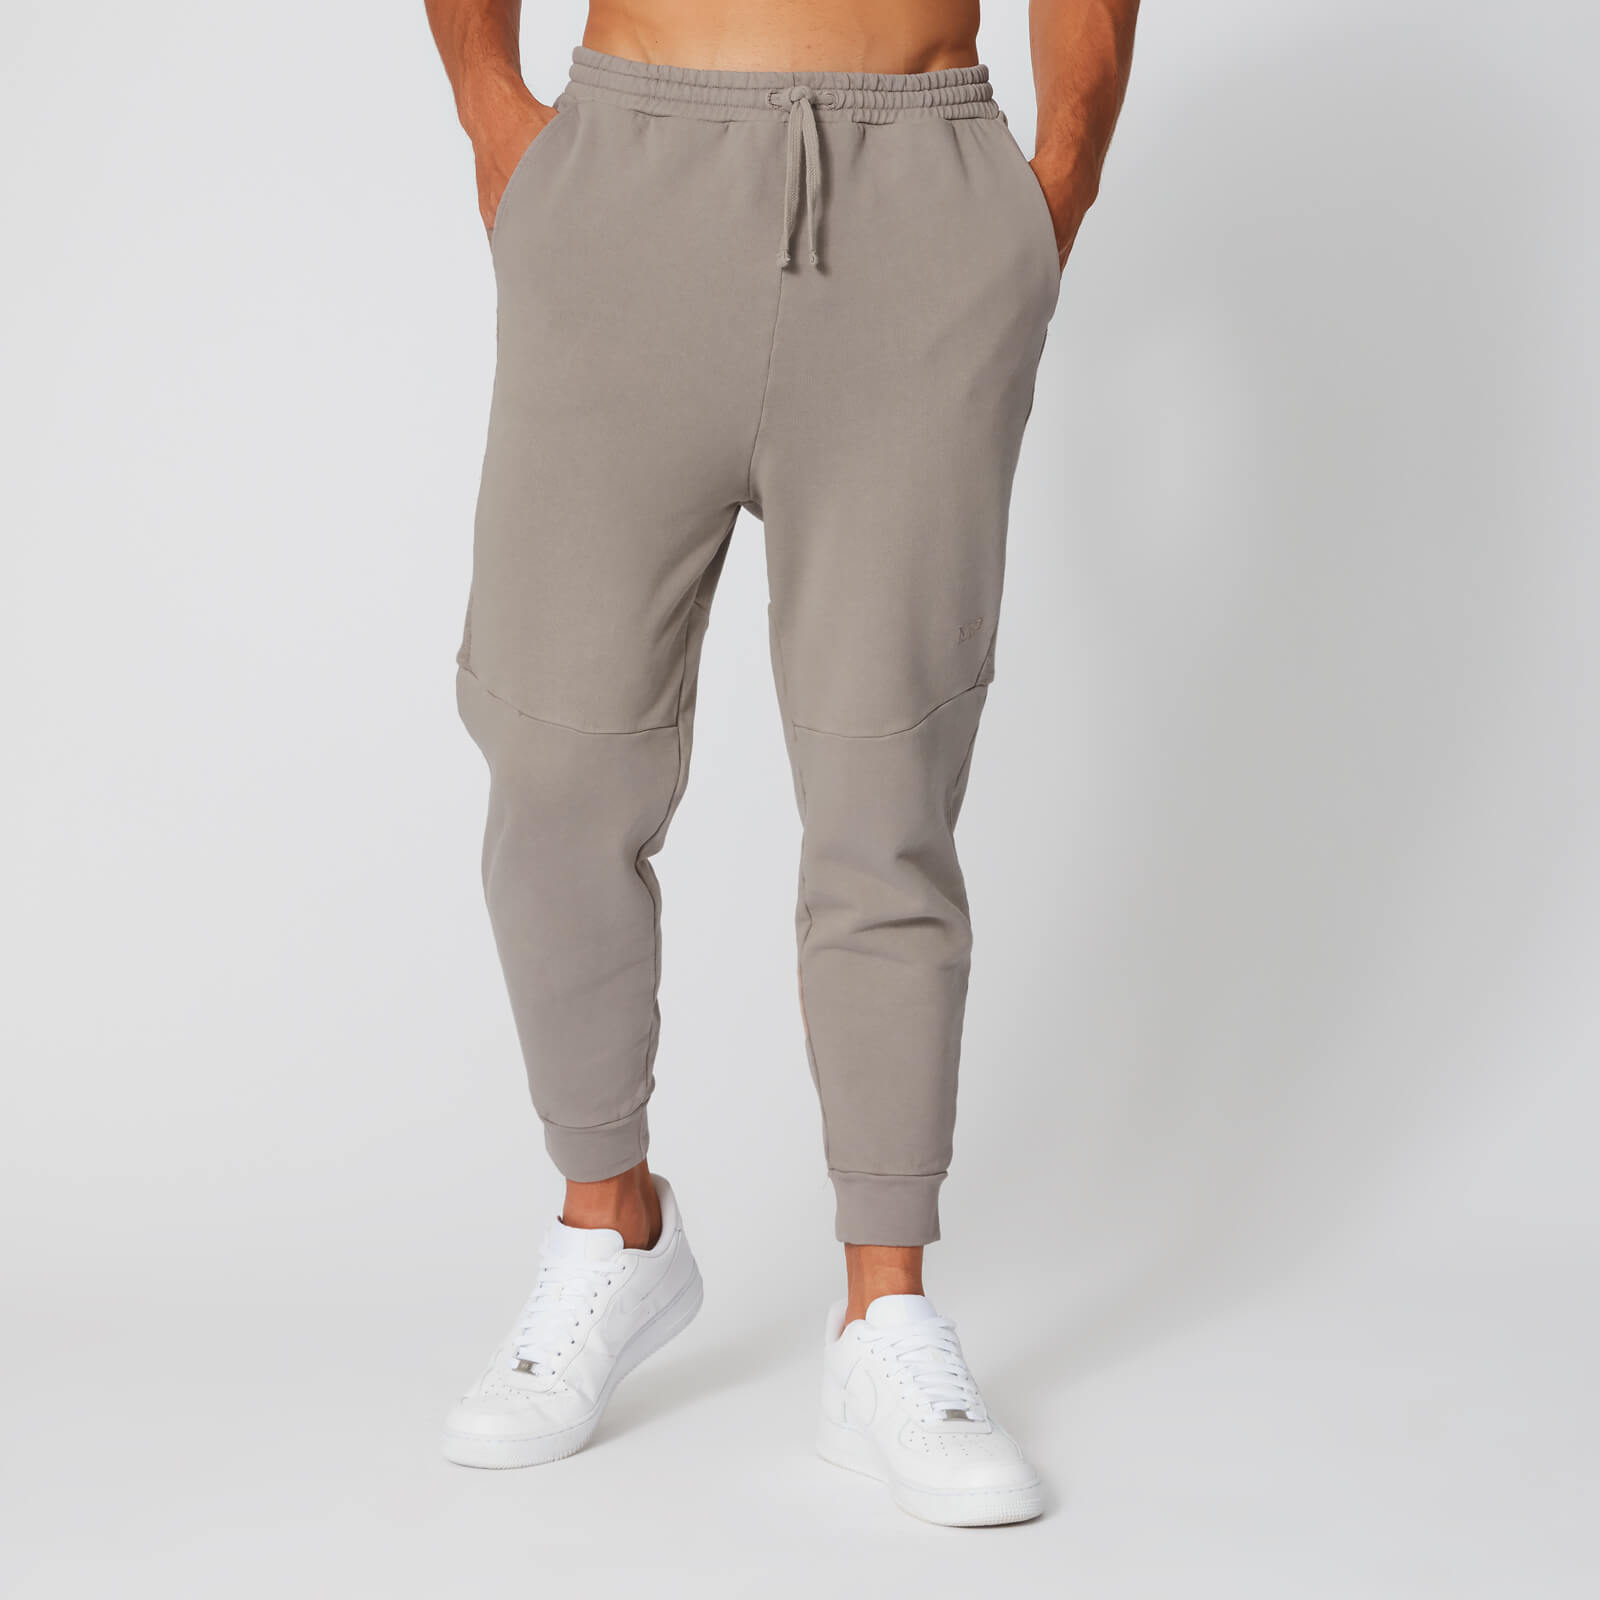 Myprotein Washed Joggers - Quarry - XS